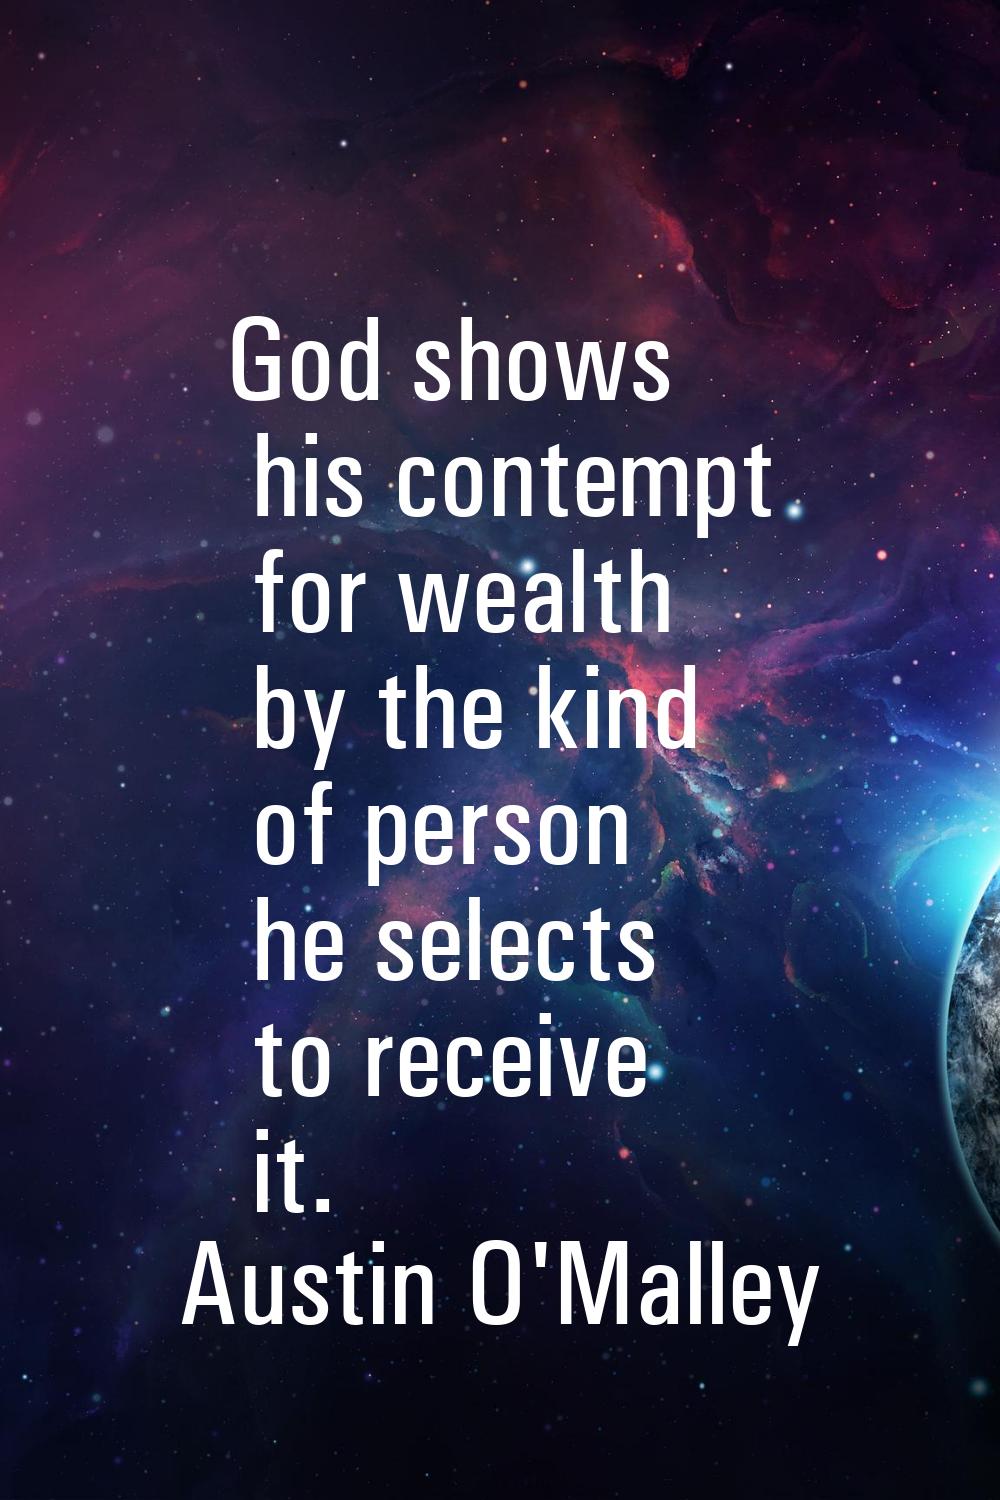 God shows his contempt for wealth by the kind of person he selects to receive it.